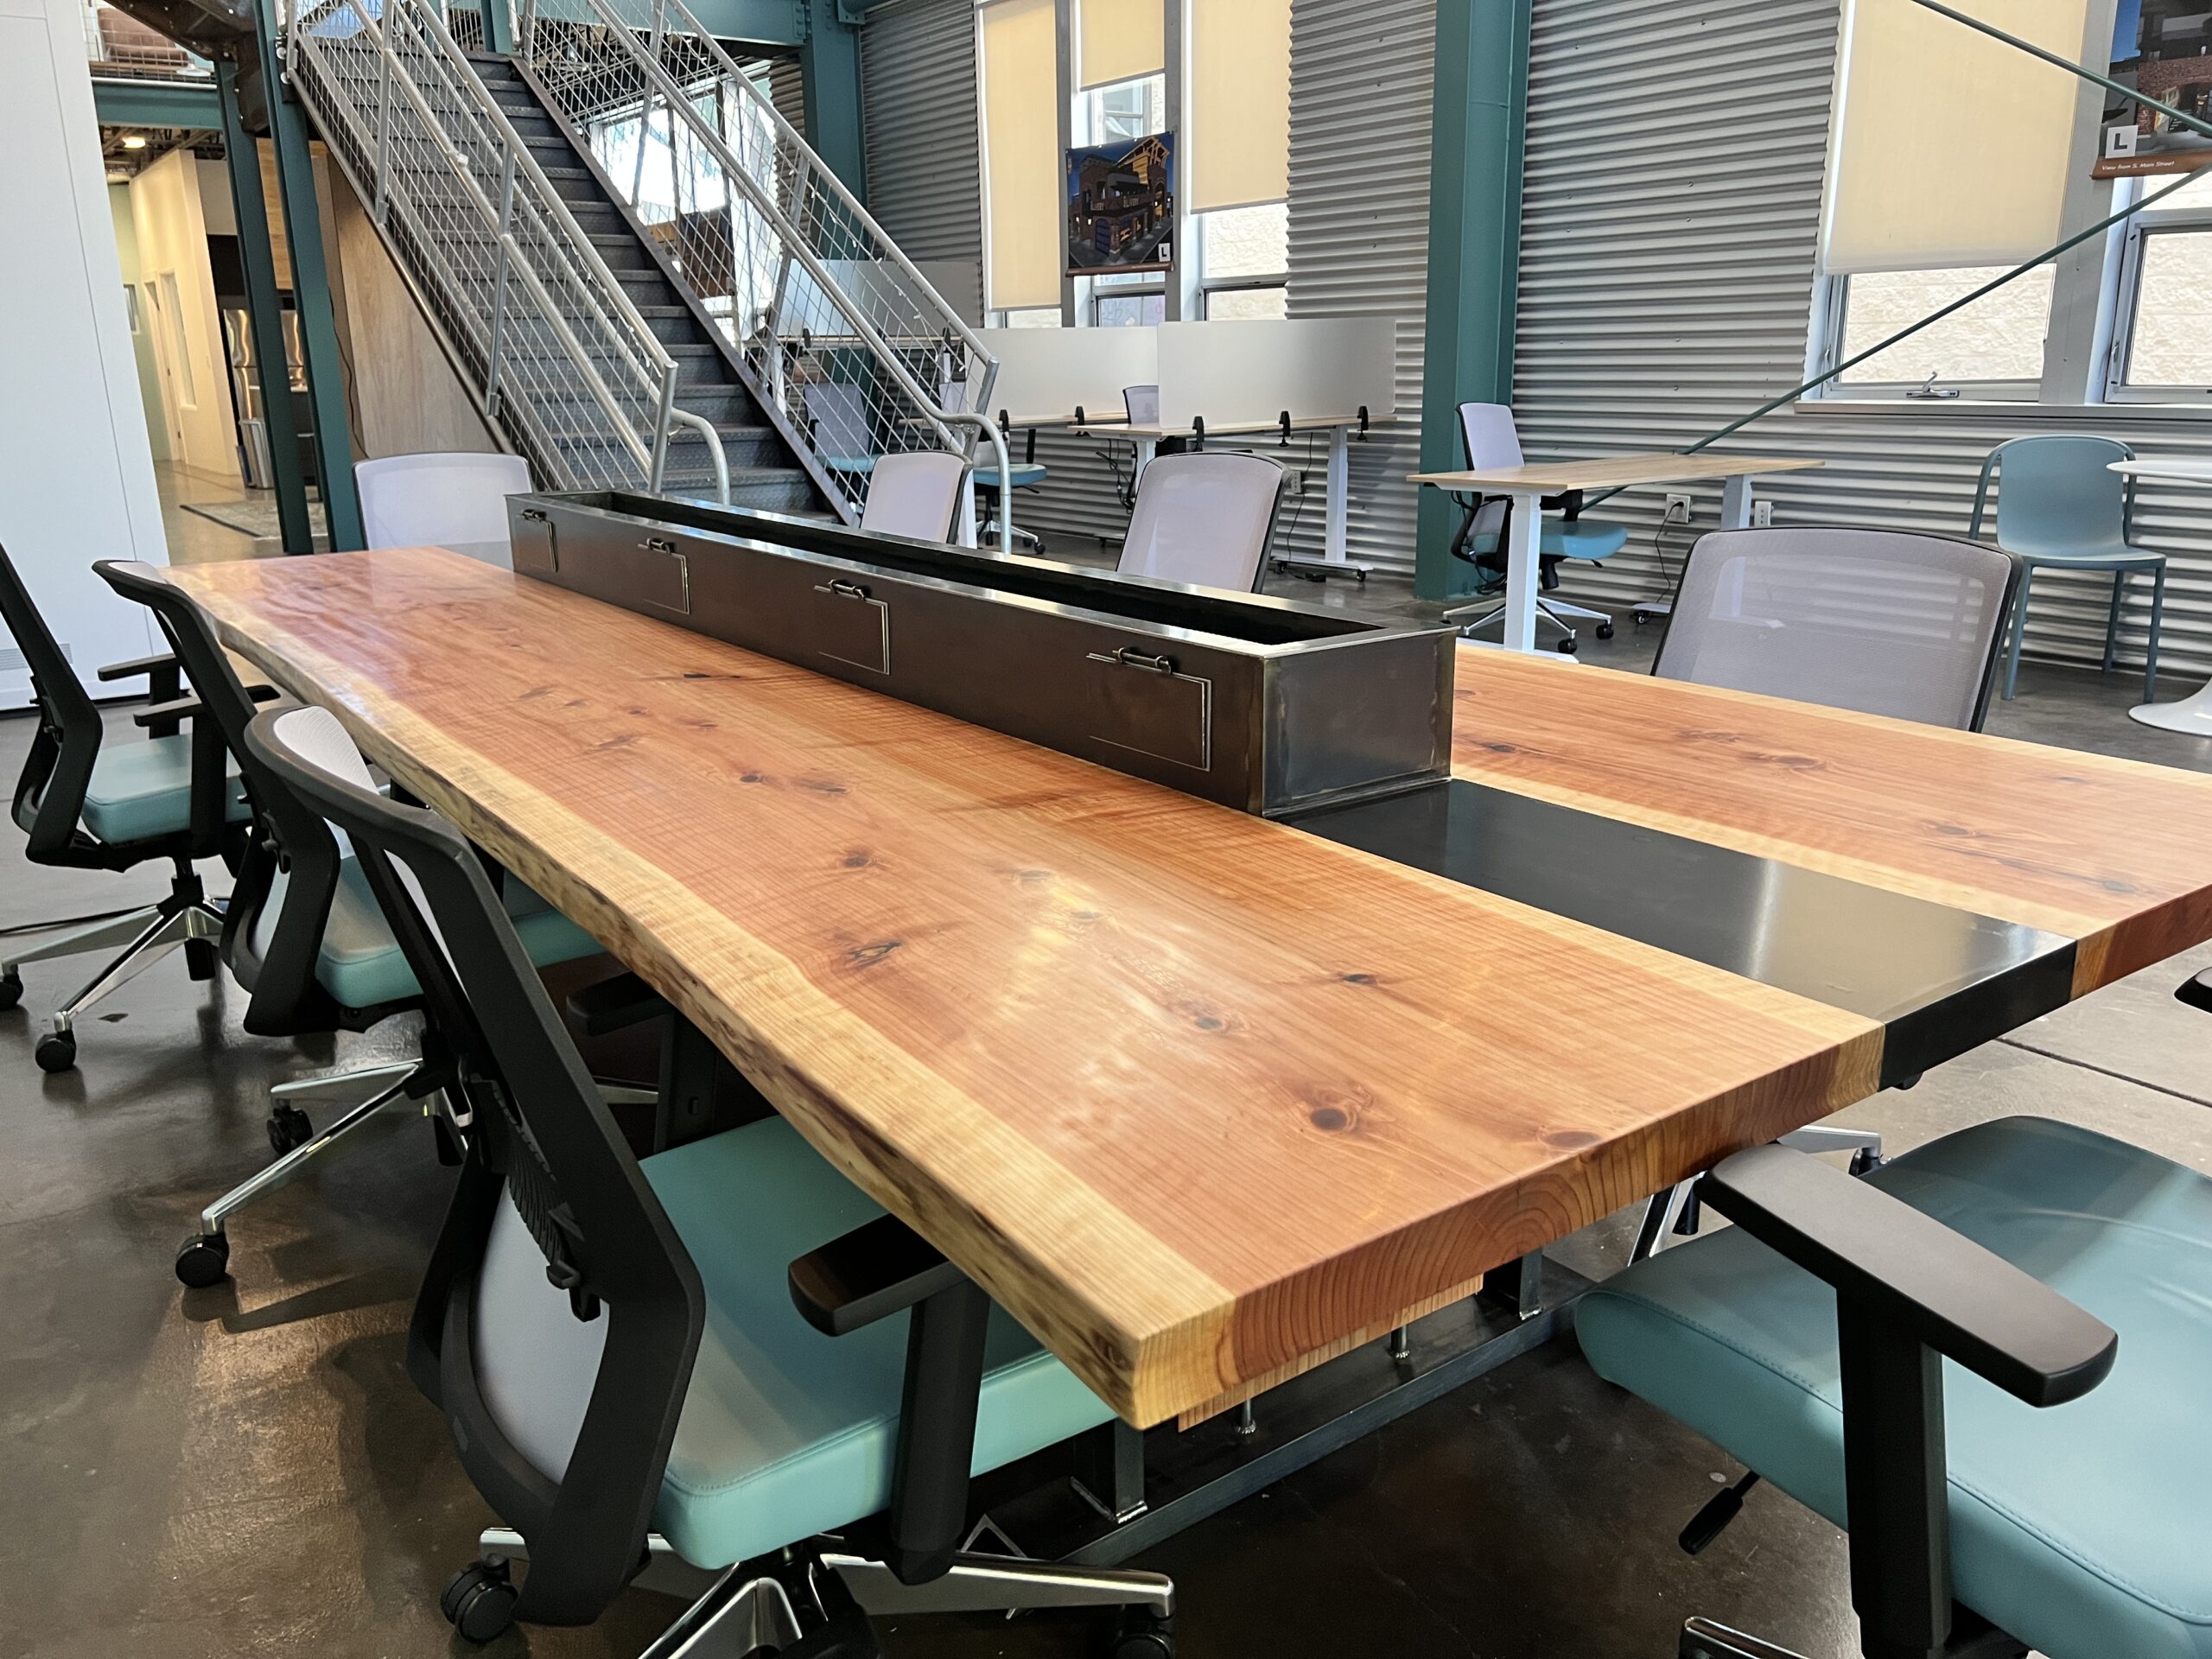 Check Out The Livery CoWork’s New Community Table!